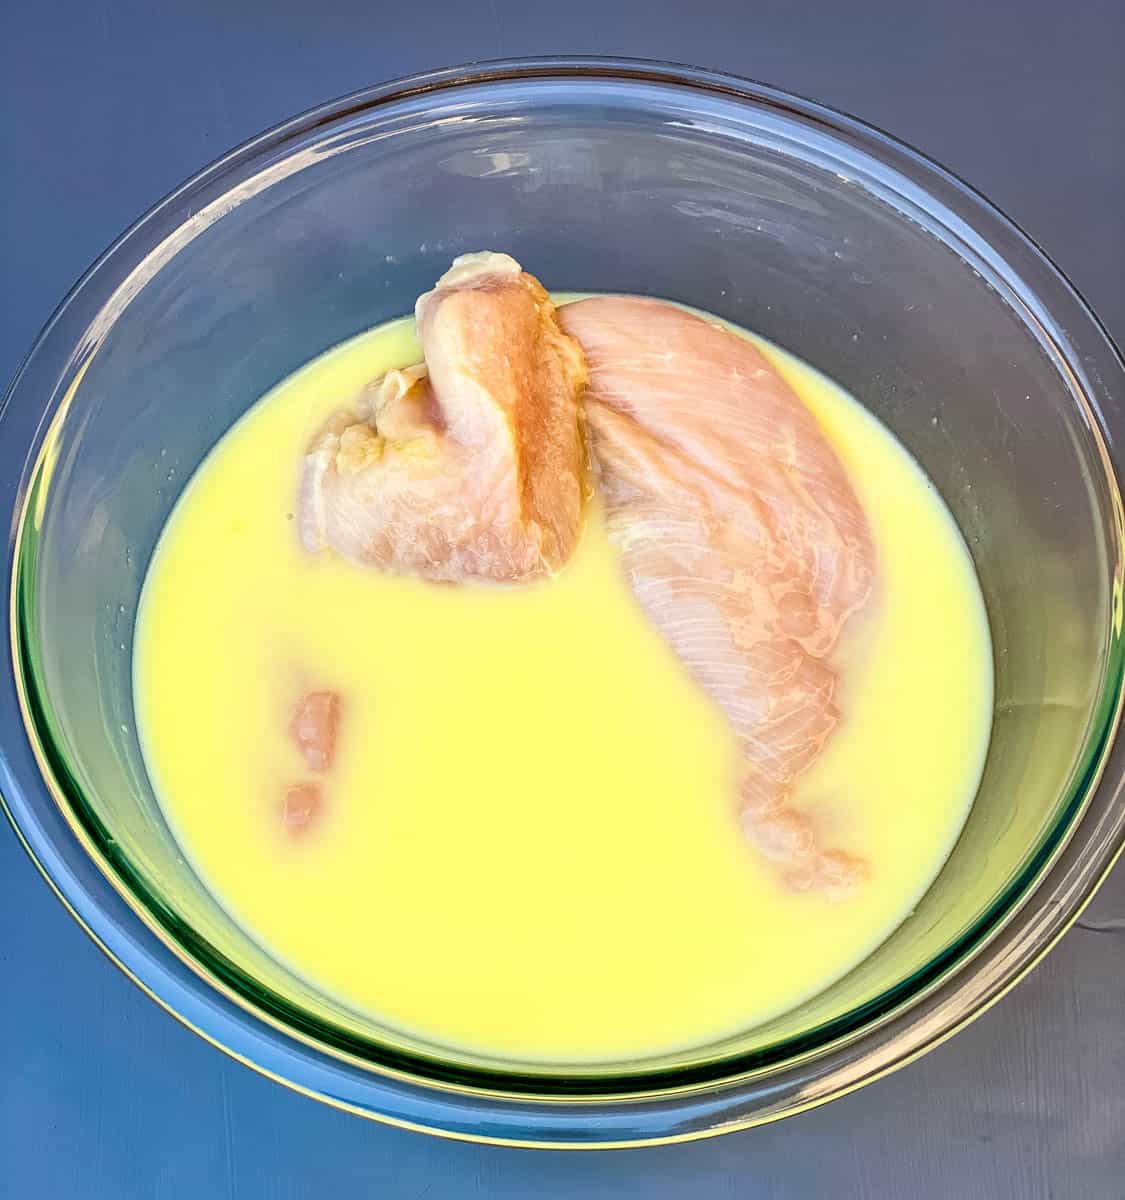 raw chicken breasts in a glass bowl with pickle juice and buttermilk